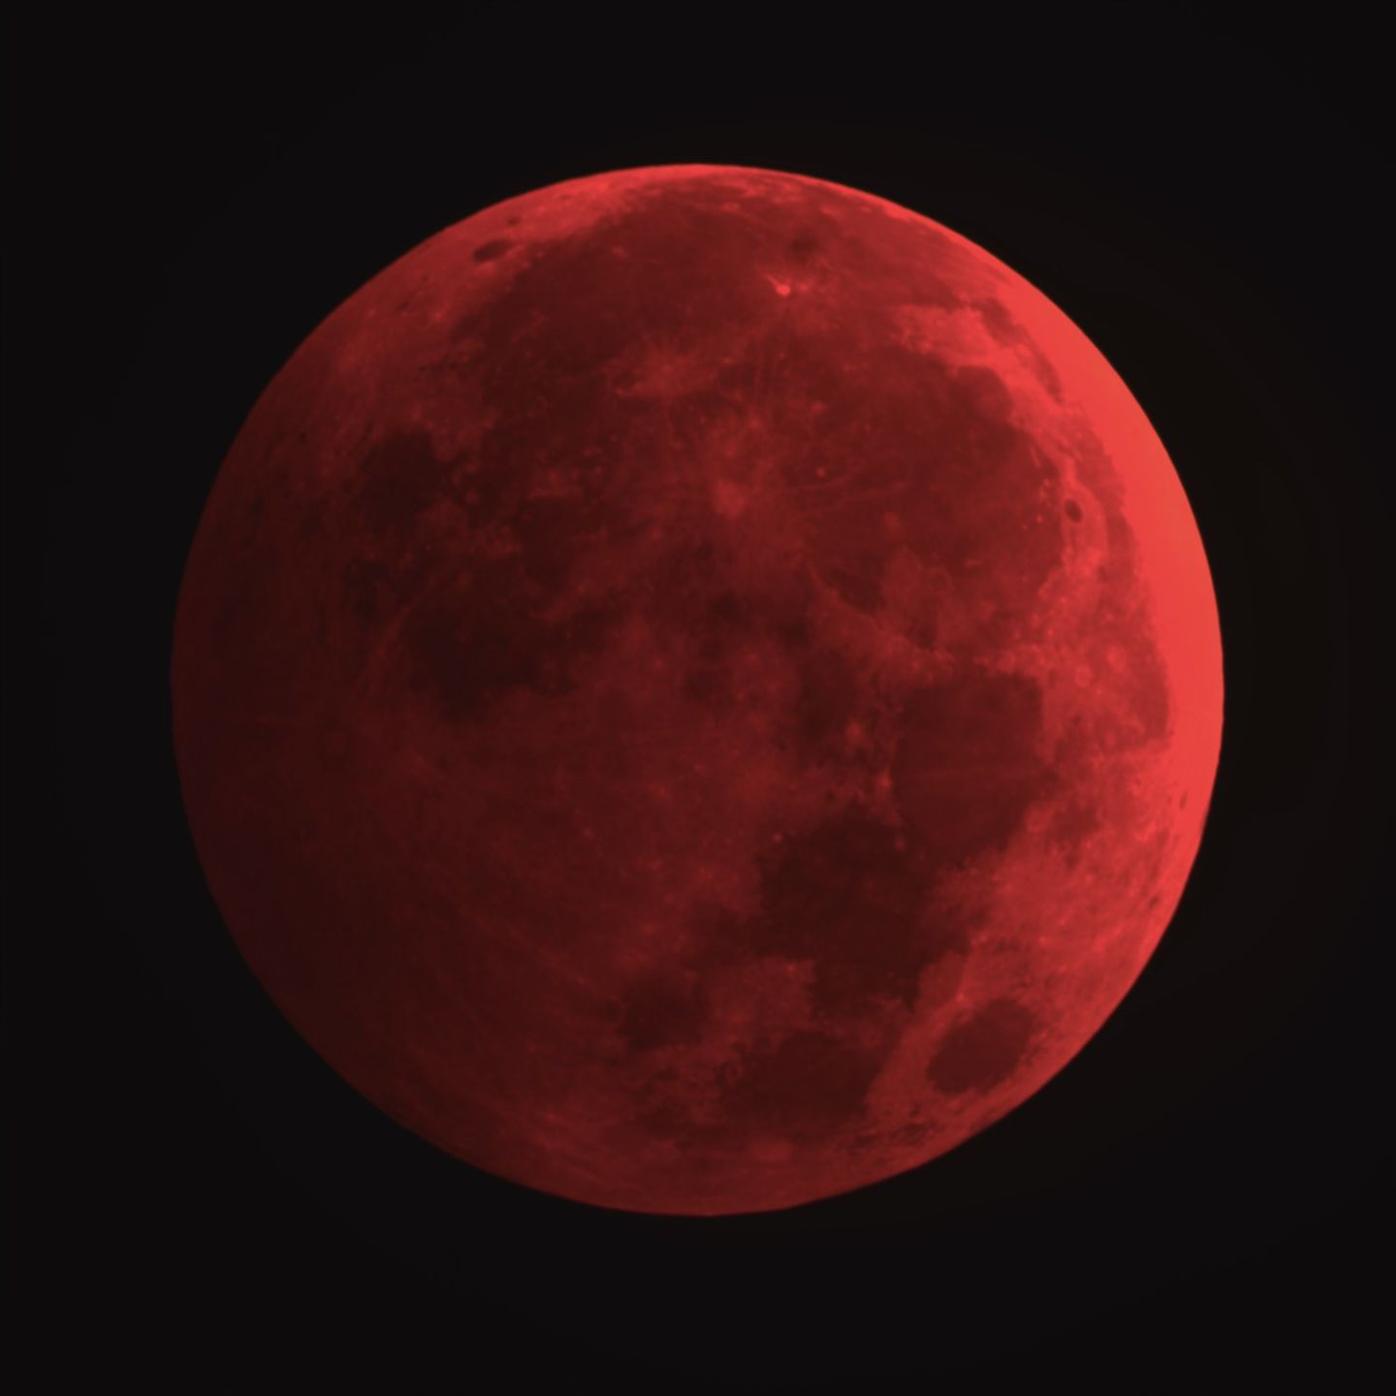 Only total lunar eclipse in 2019 graces the New Mexico winter night sky